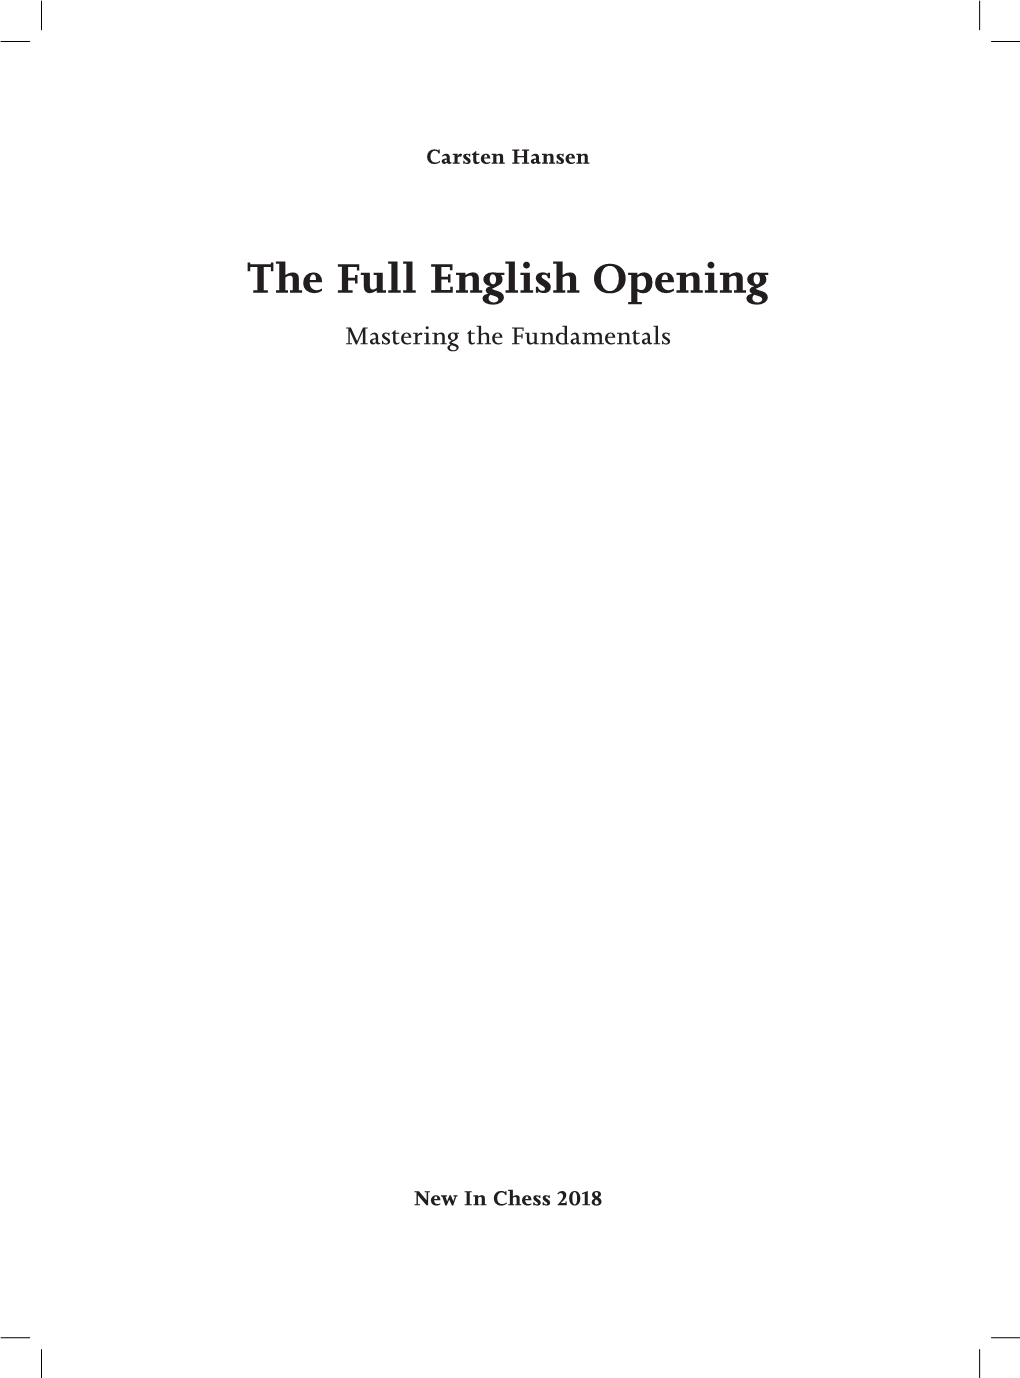 The Full English Opening Mastering the Fundamentals